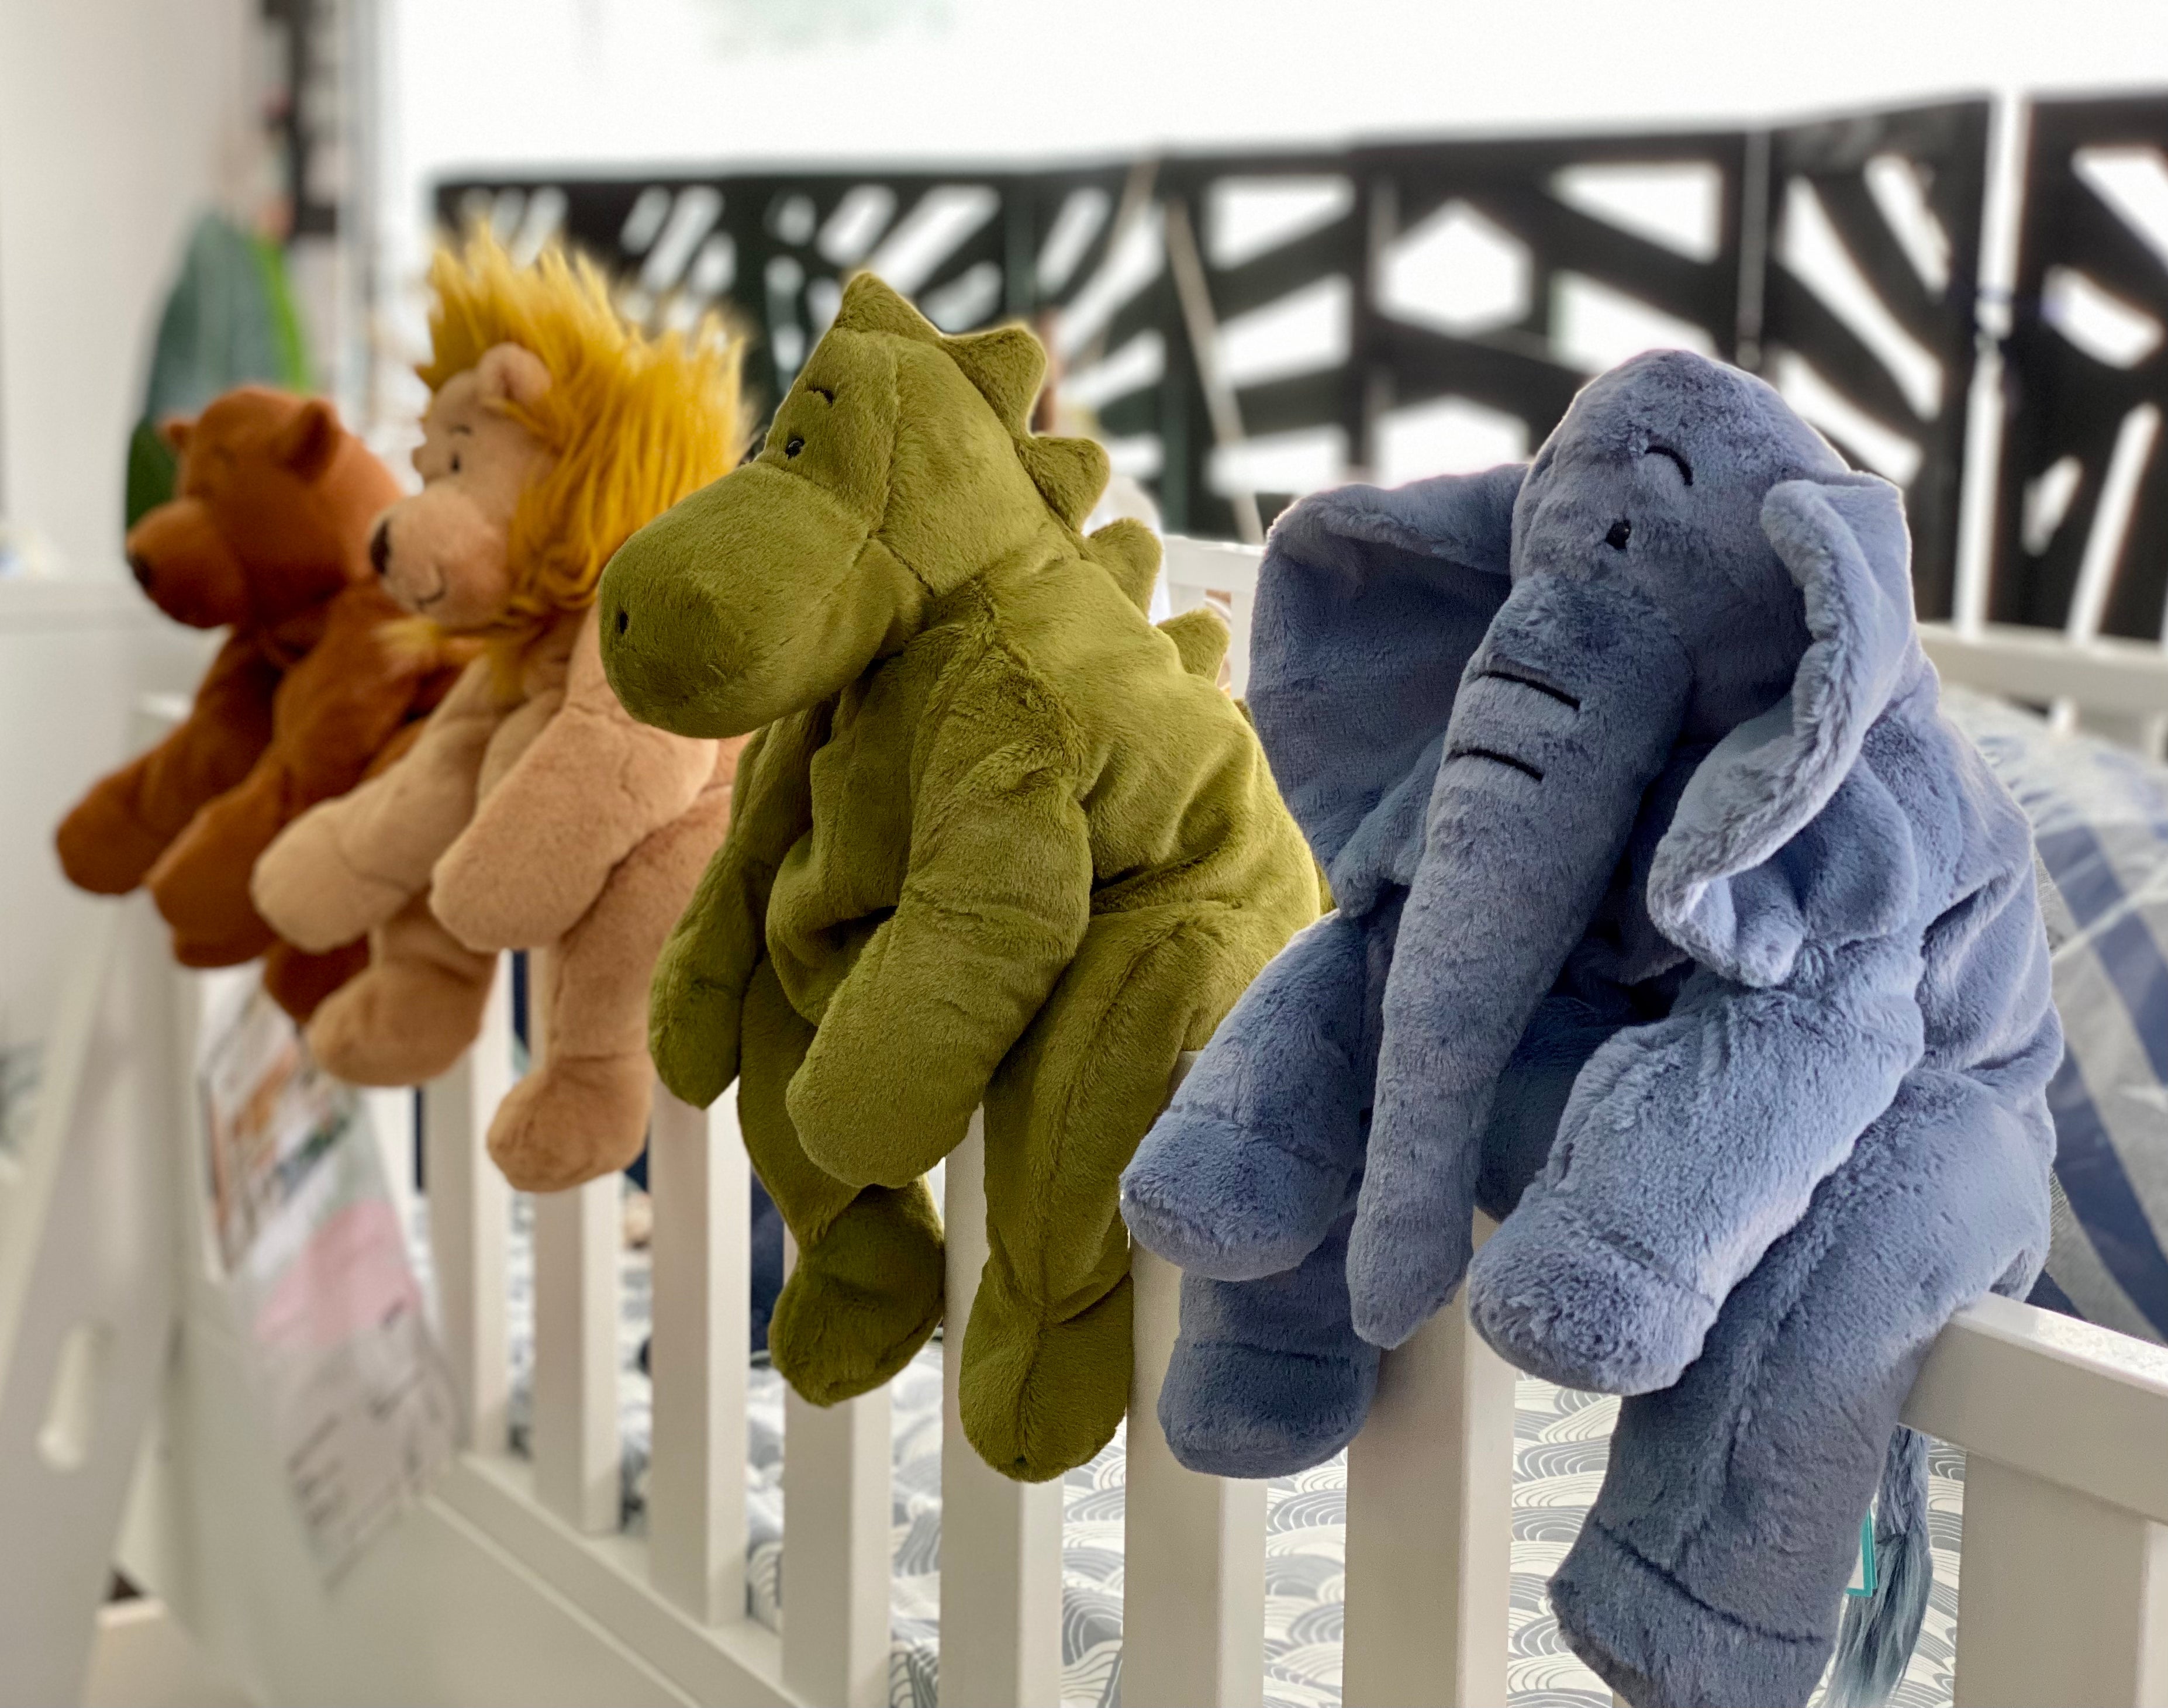 Deer Industries Soft Toys Singapore, Jellycat Singapore, Rumpletum Elephant RPL2E, Softest Soft Toy Singapore, Gifts for newborn, gifts for animal lovers